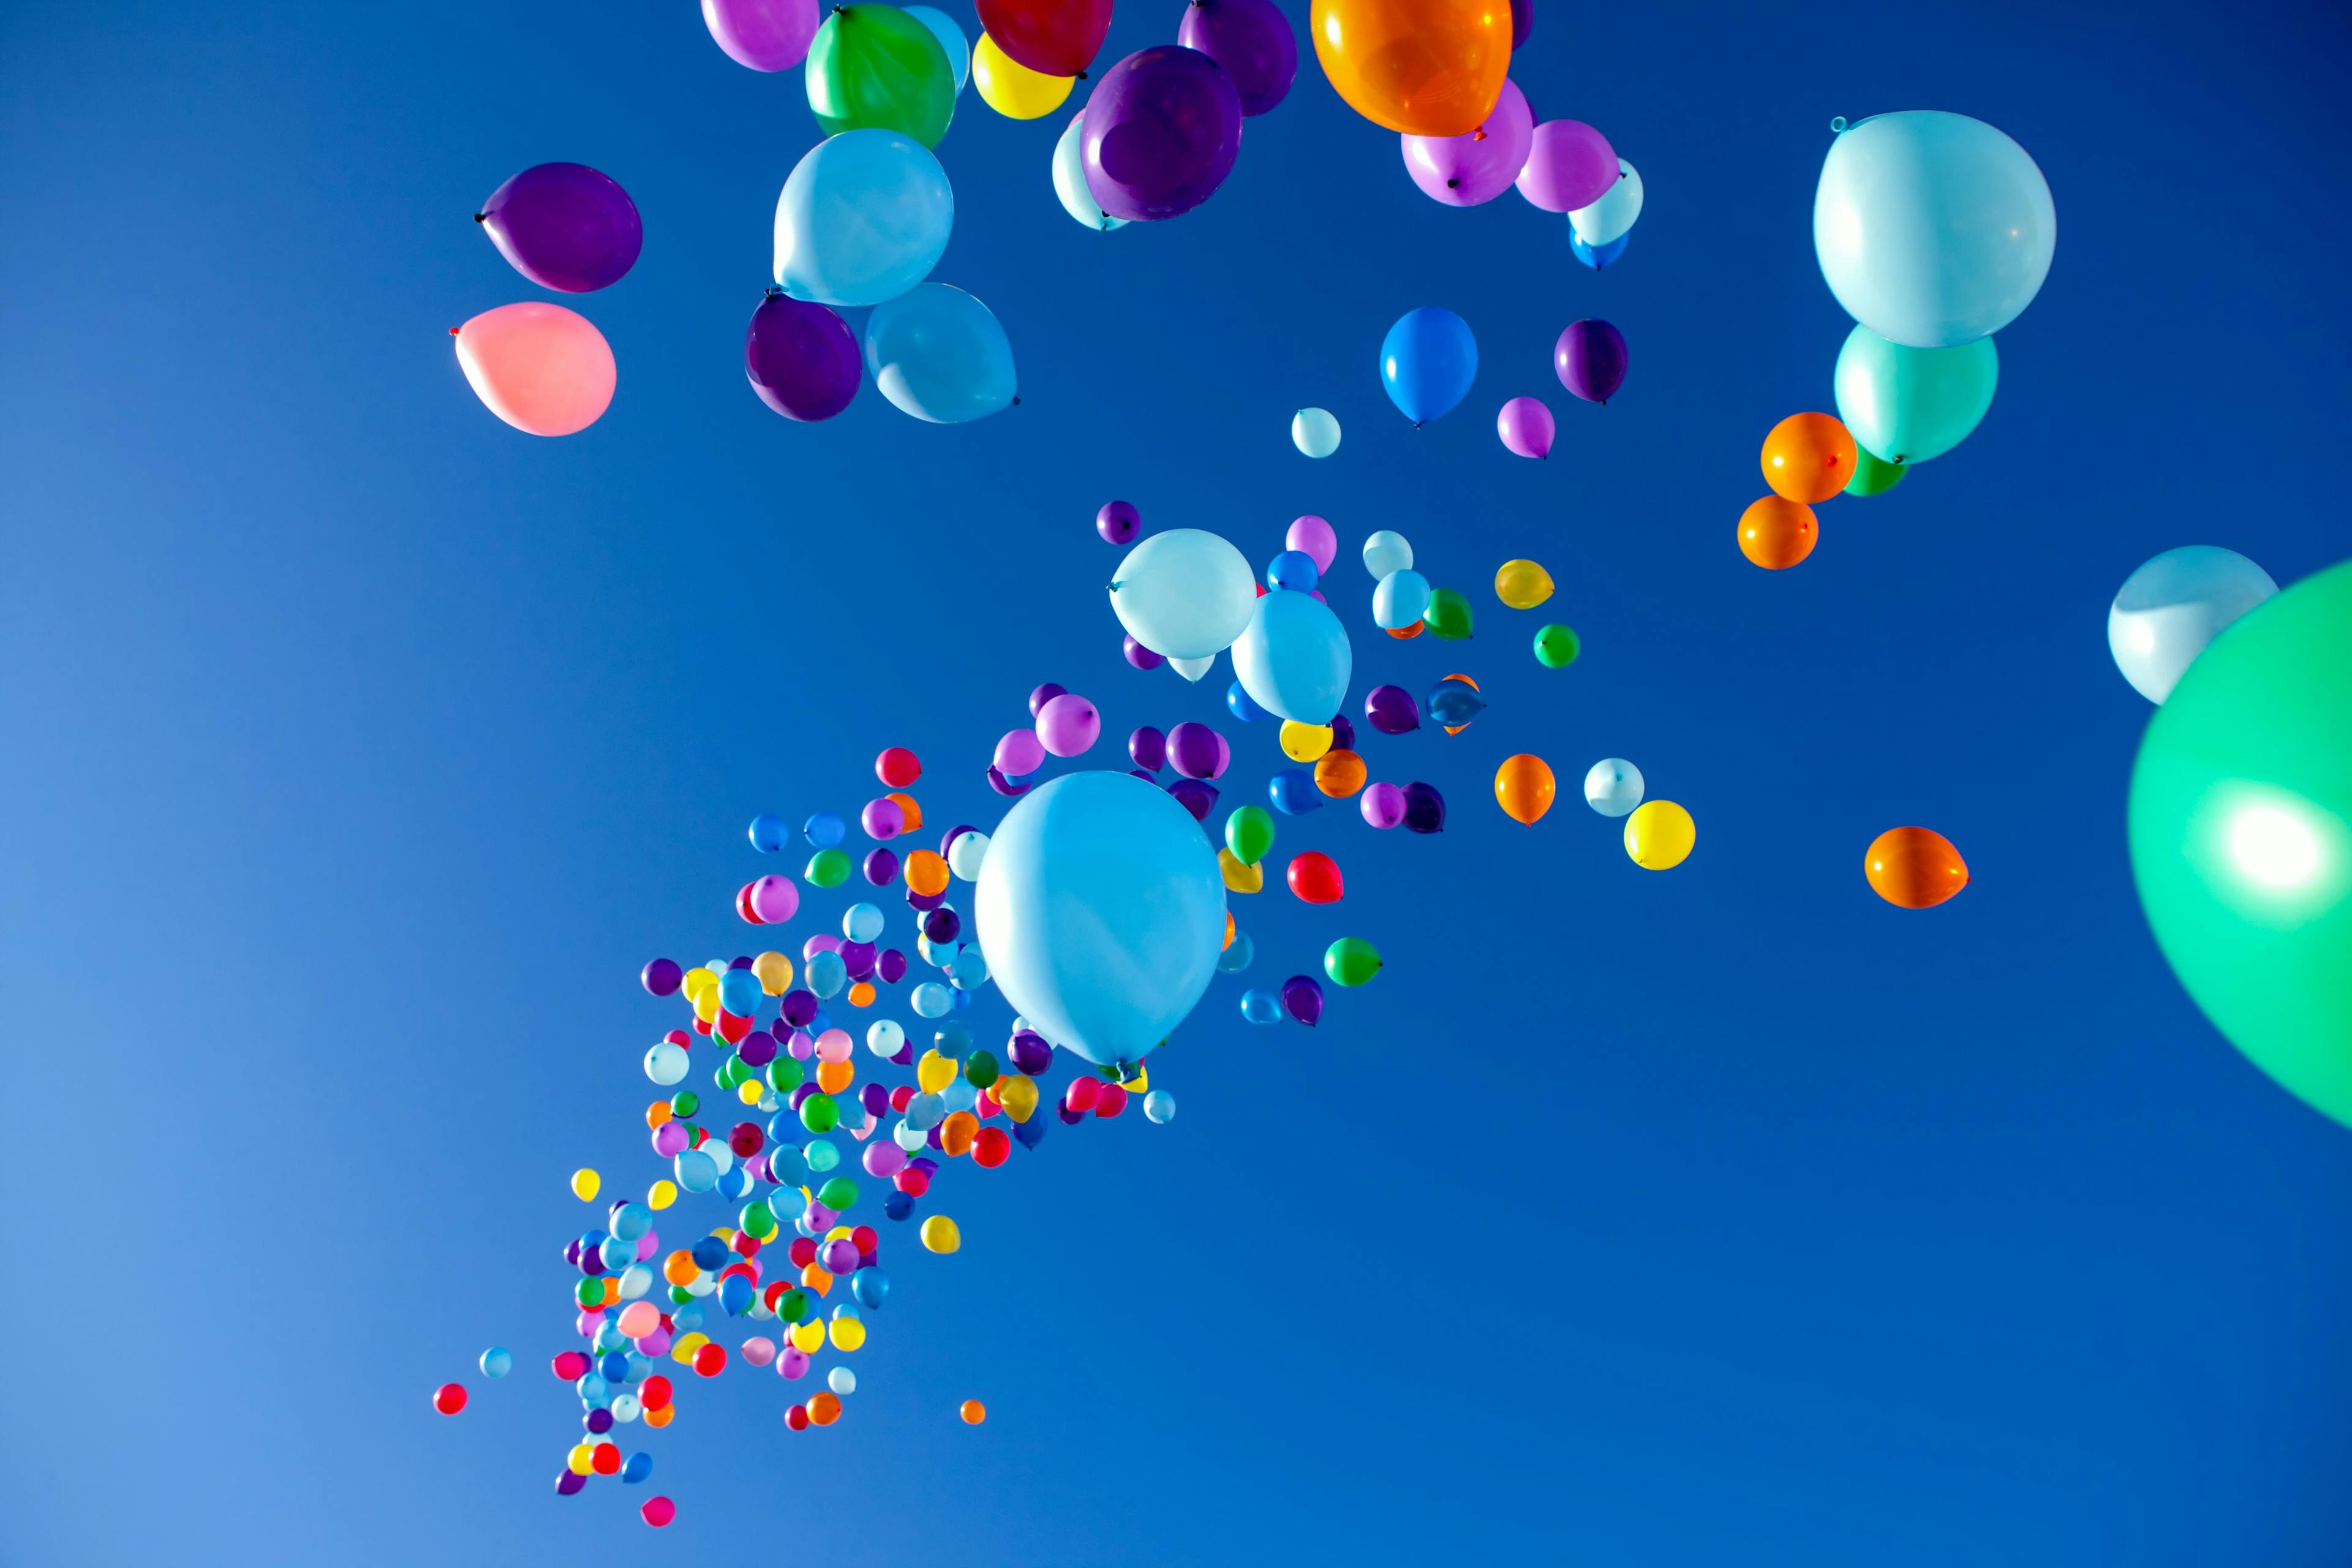 Colorful Balloons flying in the sky party/fotoru/AdobeStock